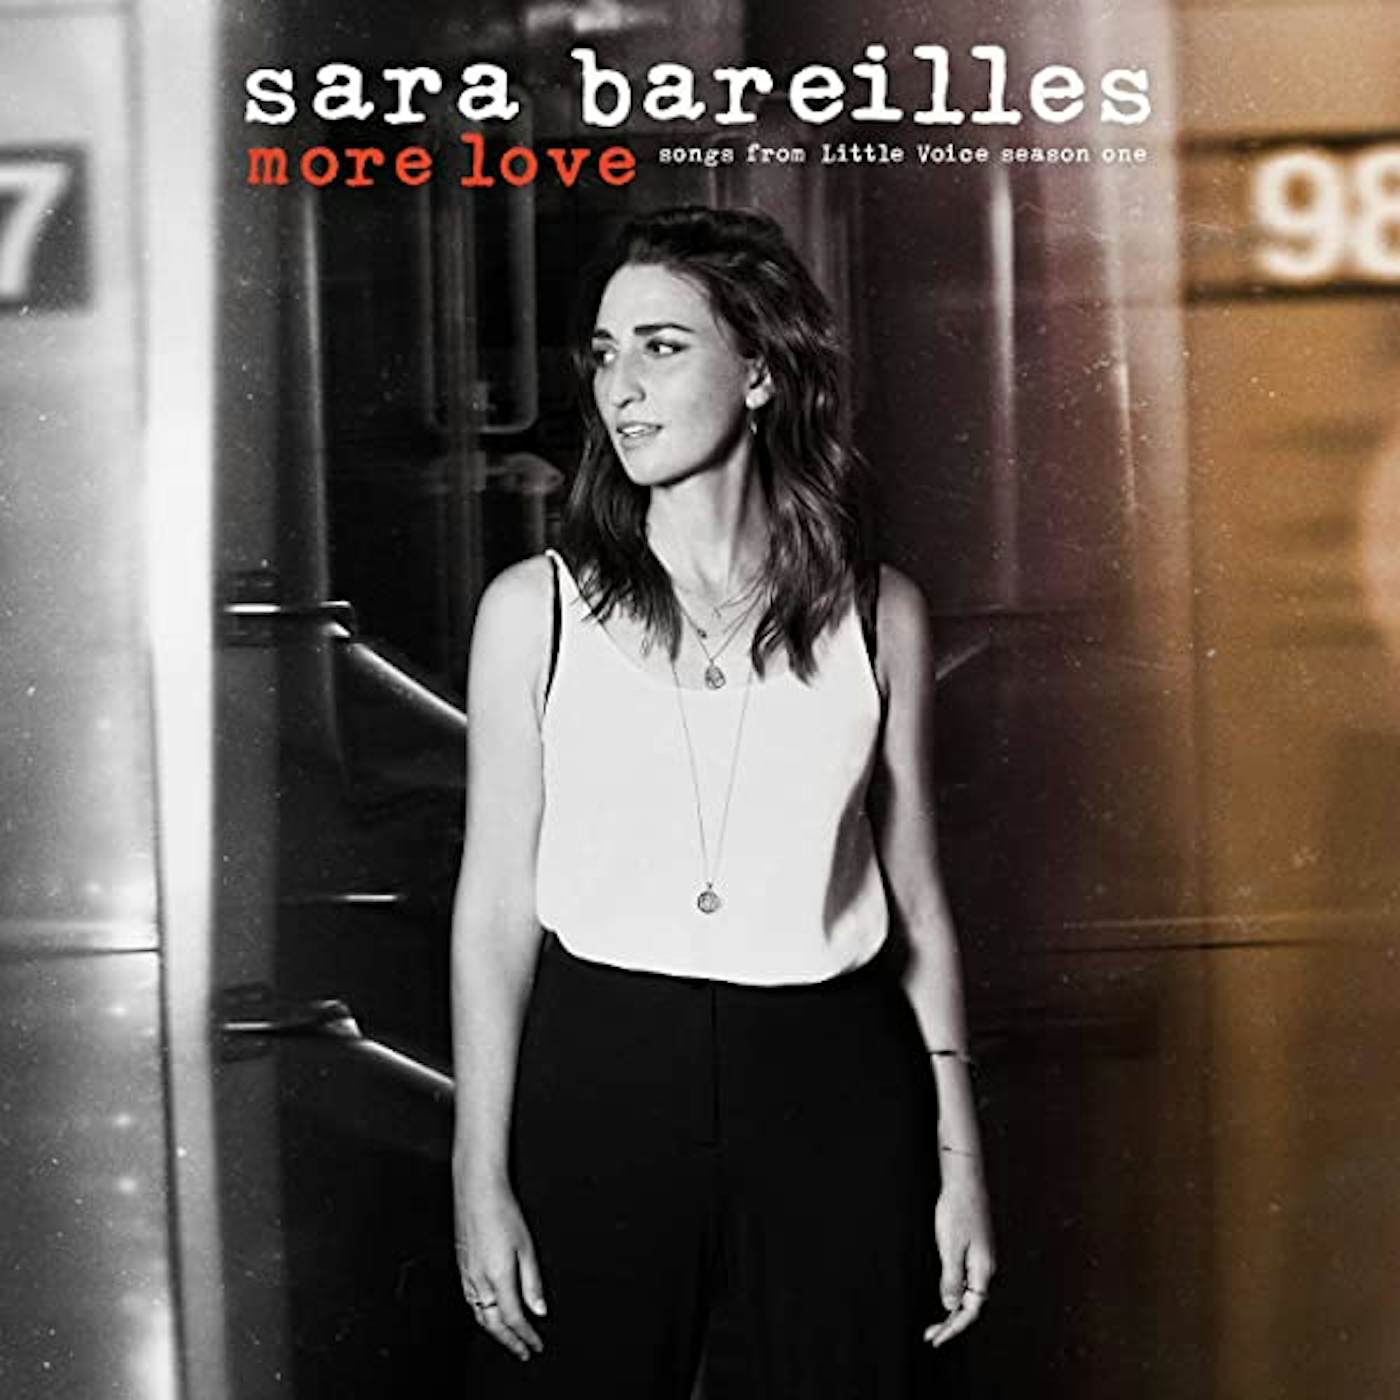 Sara Bareilles More Love - Songs from Little Voice Season One Vinyl Record